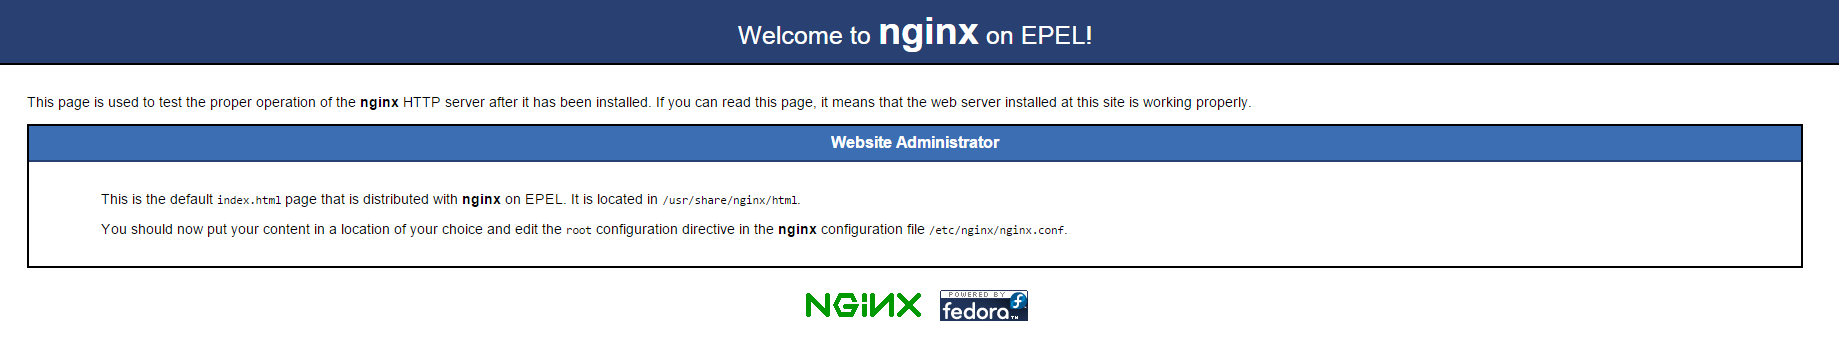 This is the default webpage when installing Nginx on CentOS 6.7